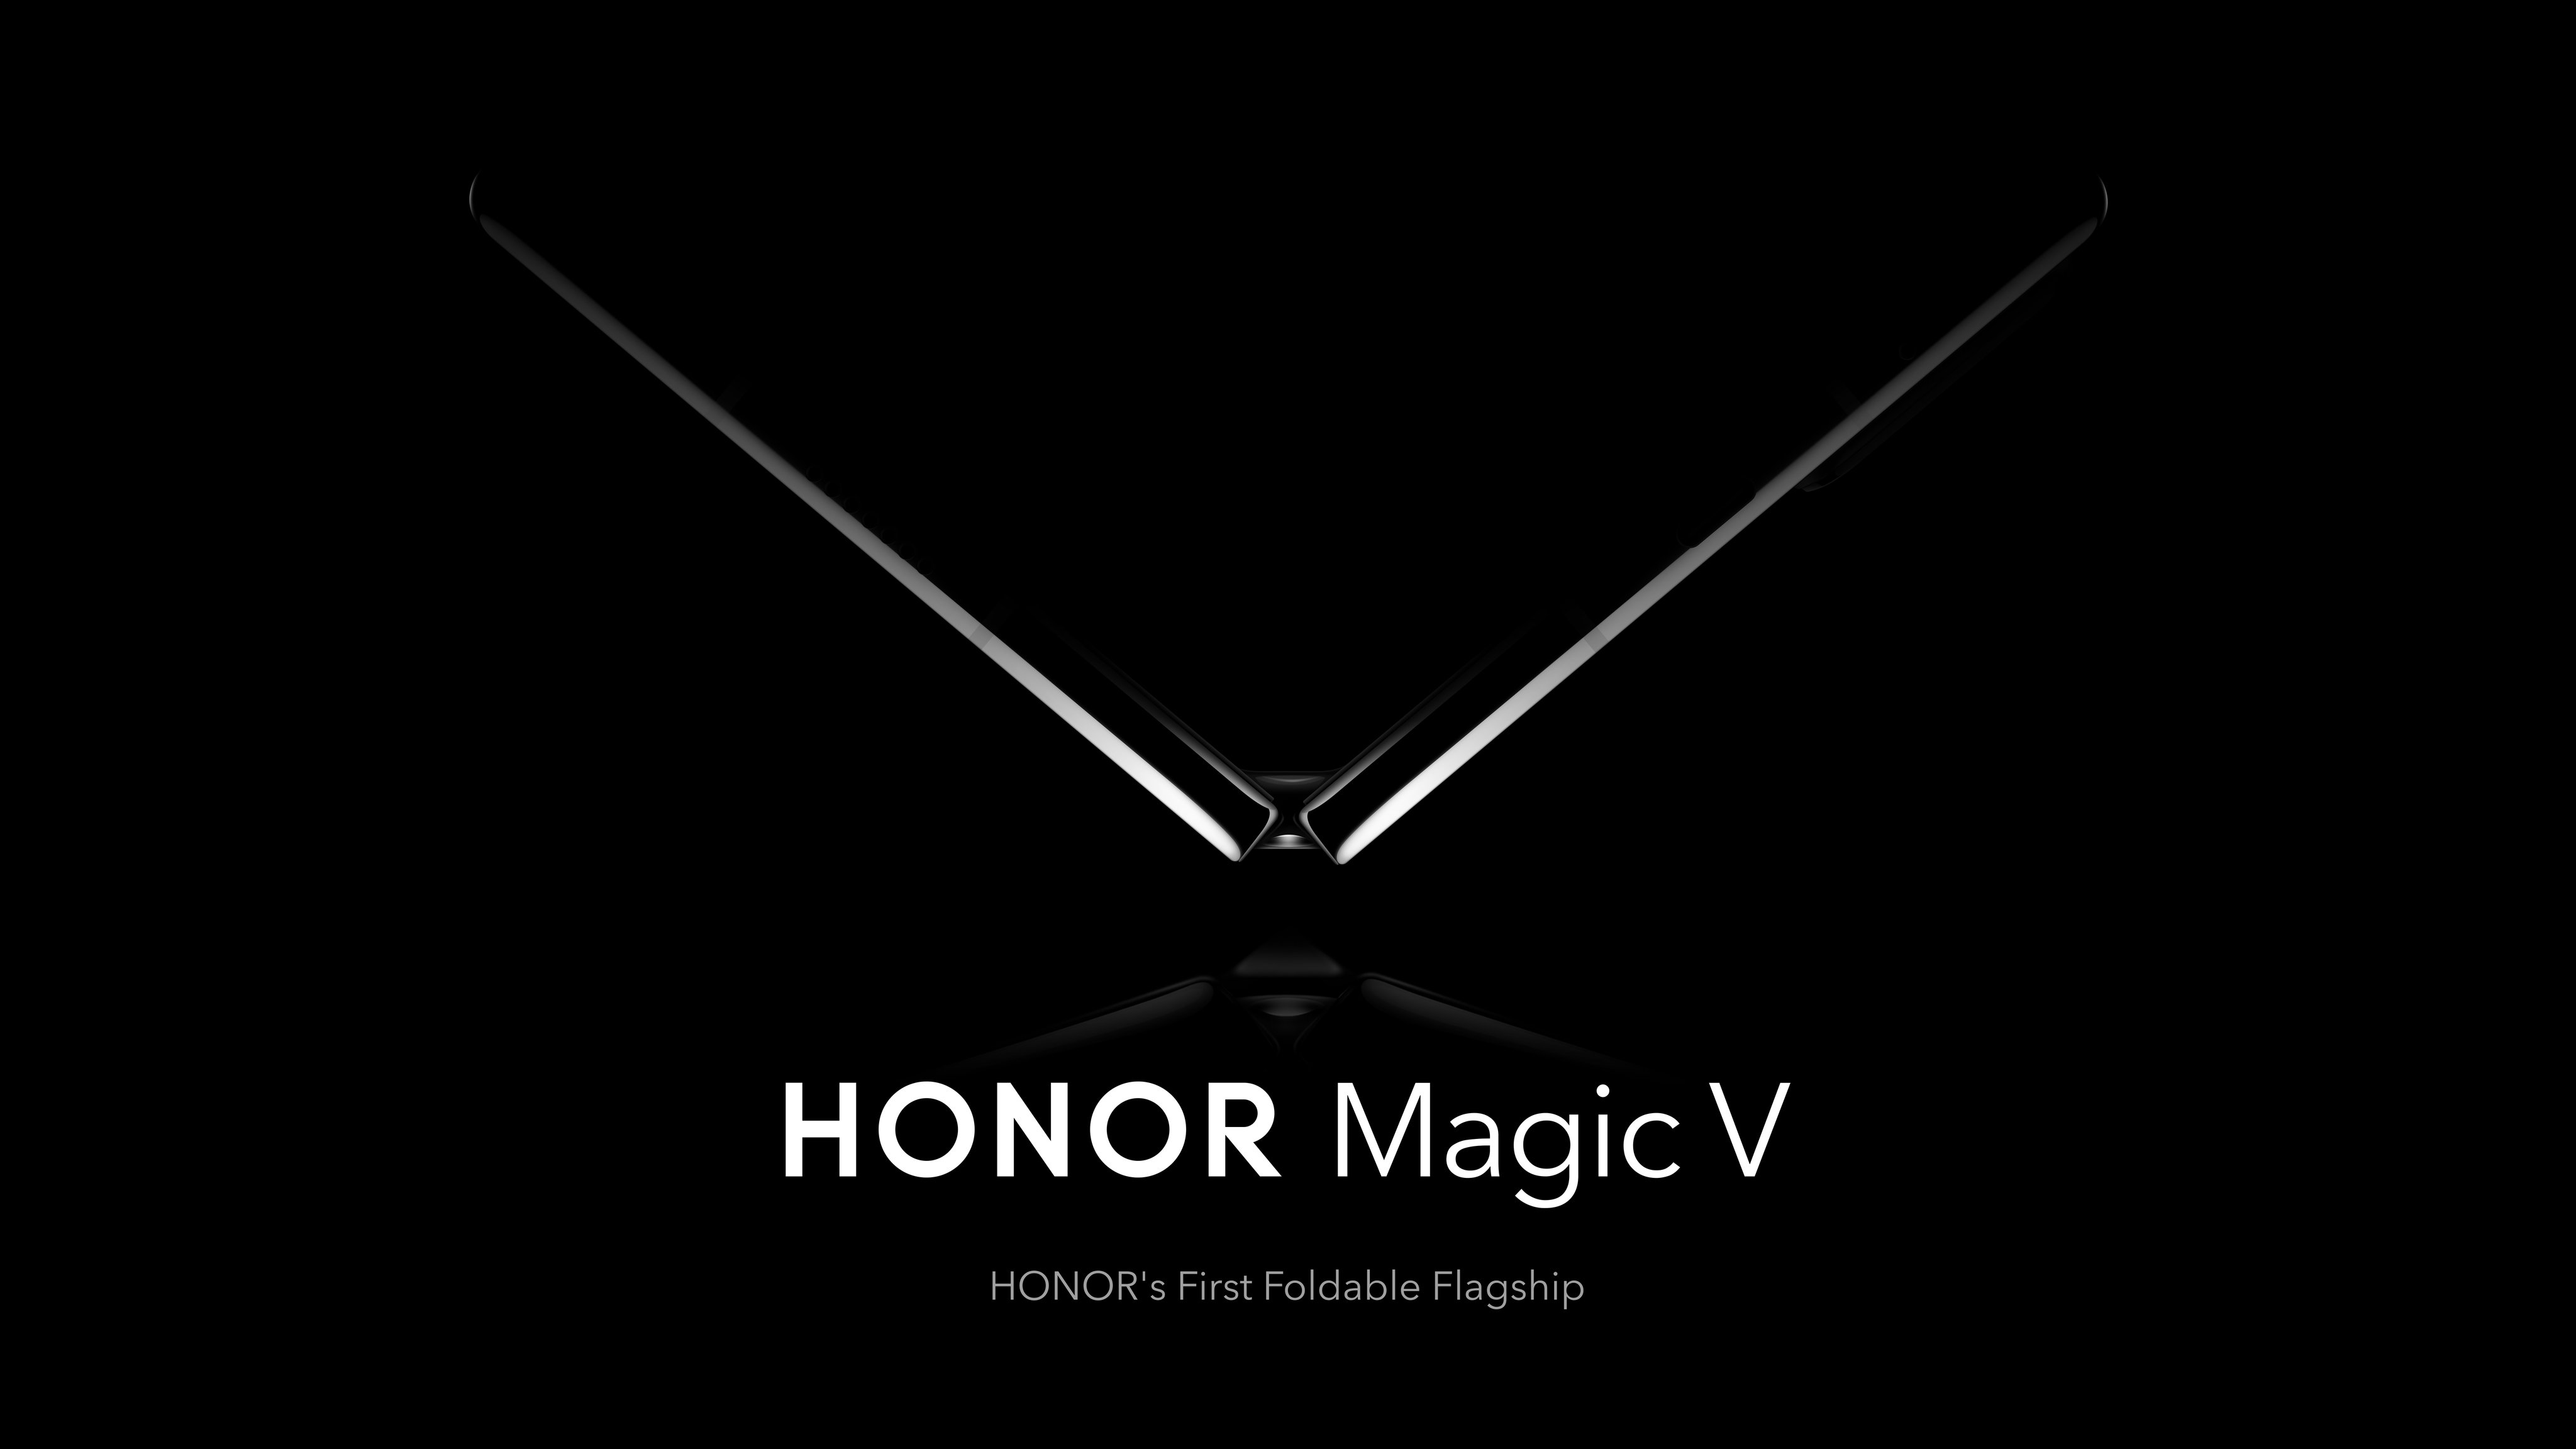 Honor Magic V rivals Samsung Galaxy Z Fold 3 and the company's first foldable smartphone